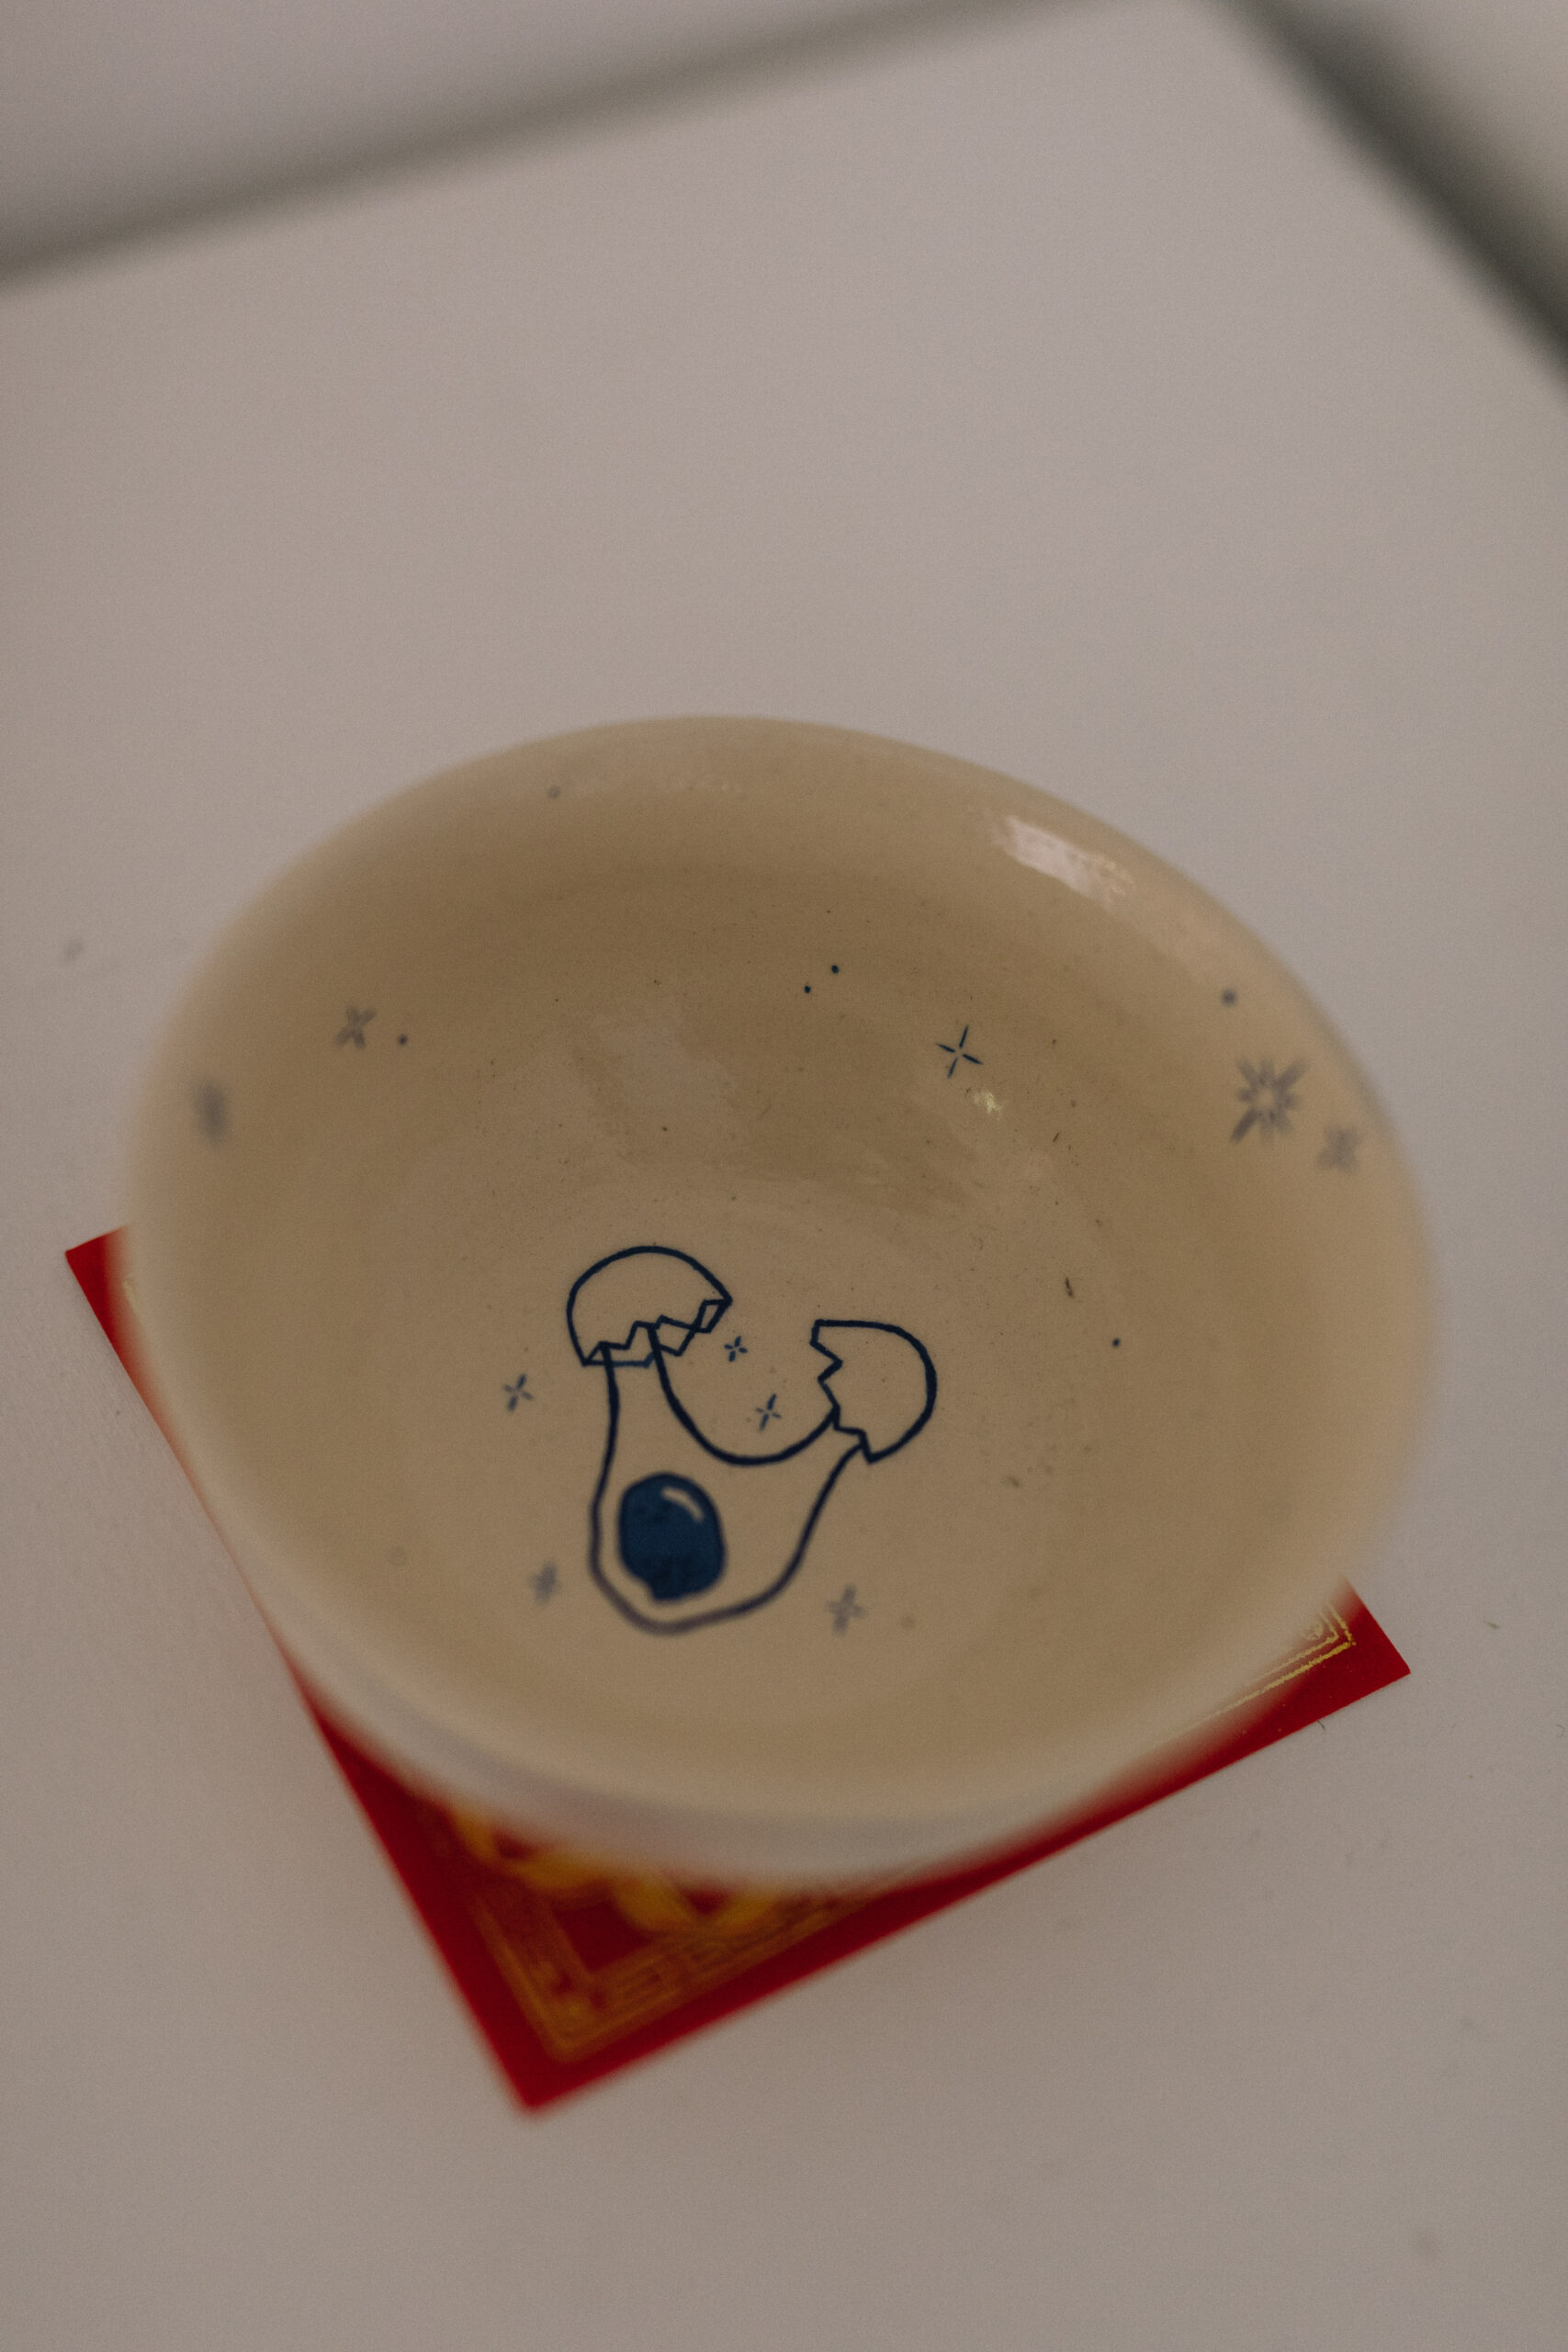 Detail of a ceramic with a blue line drawing of a cracked egg.